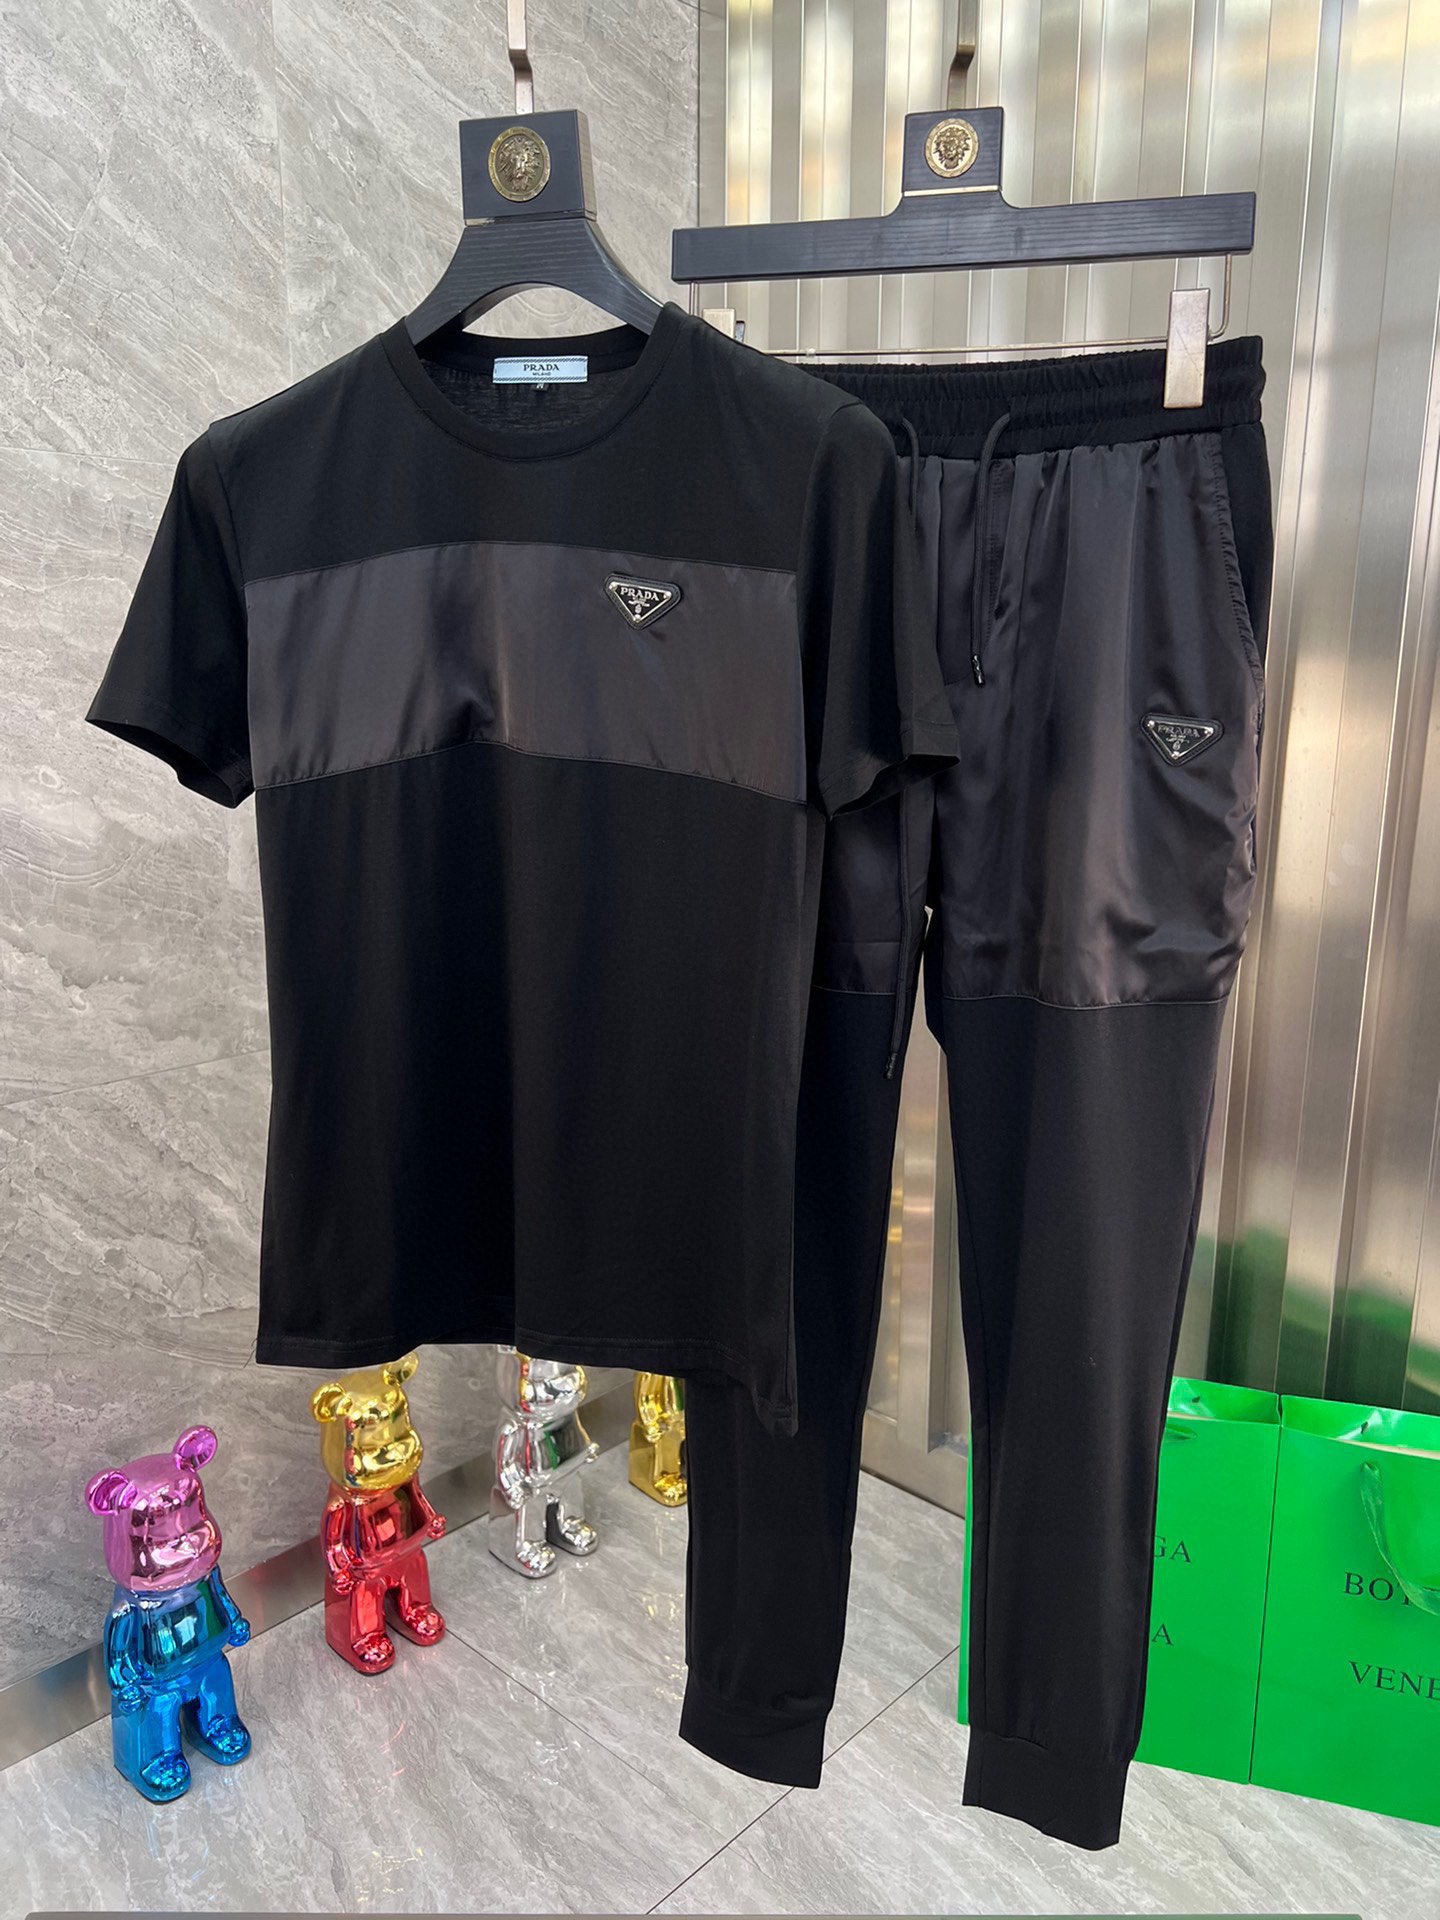 Prada Clothing T-Shirt Two Piece Outfits & Matching Sets Replica 1:1 High Quality
 Men Summer Collection Fashion Short Sleeve